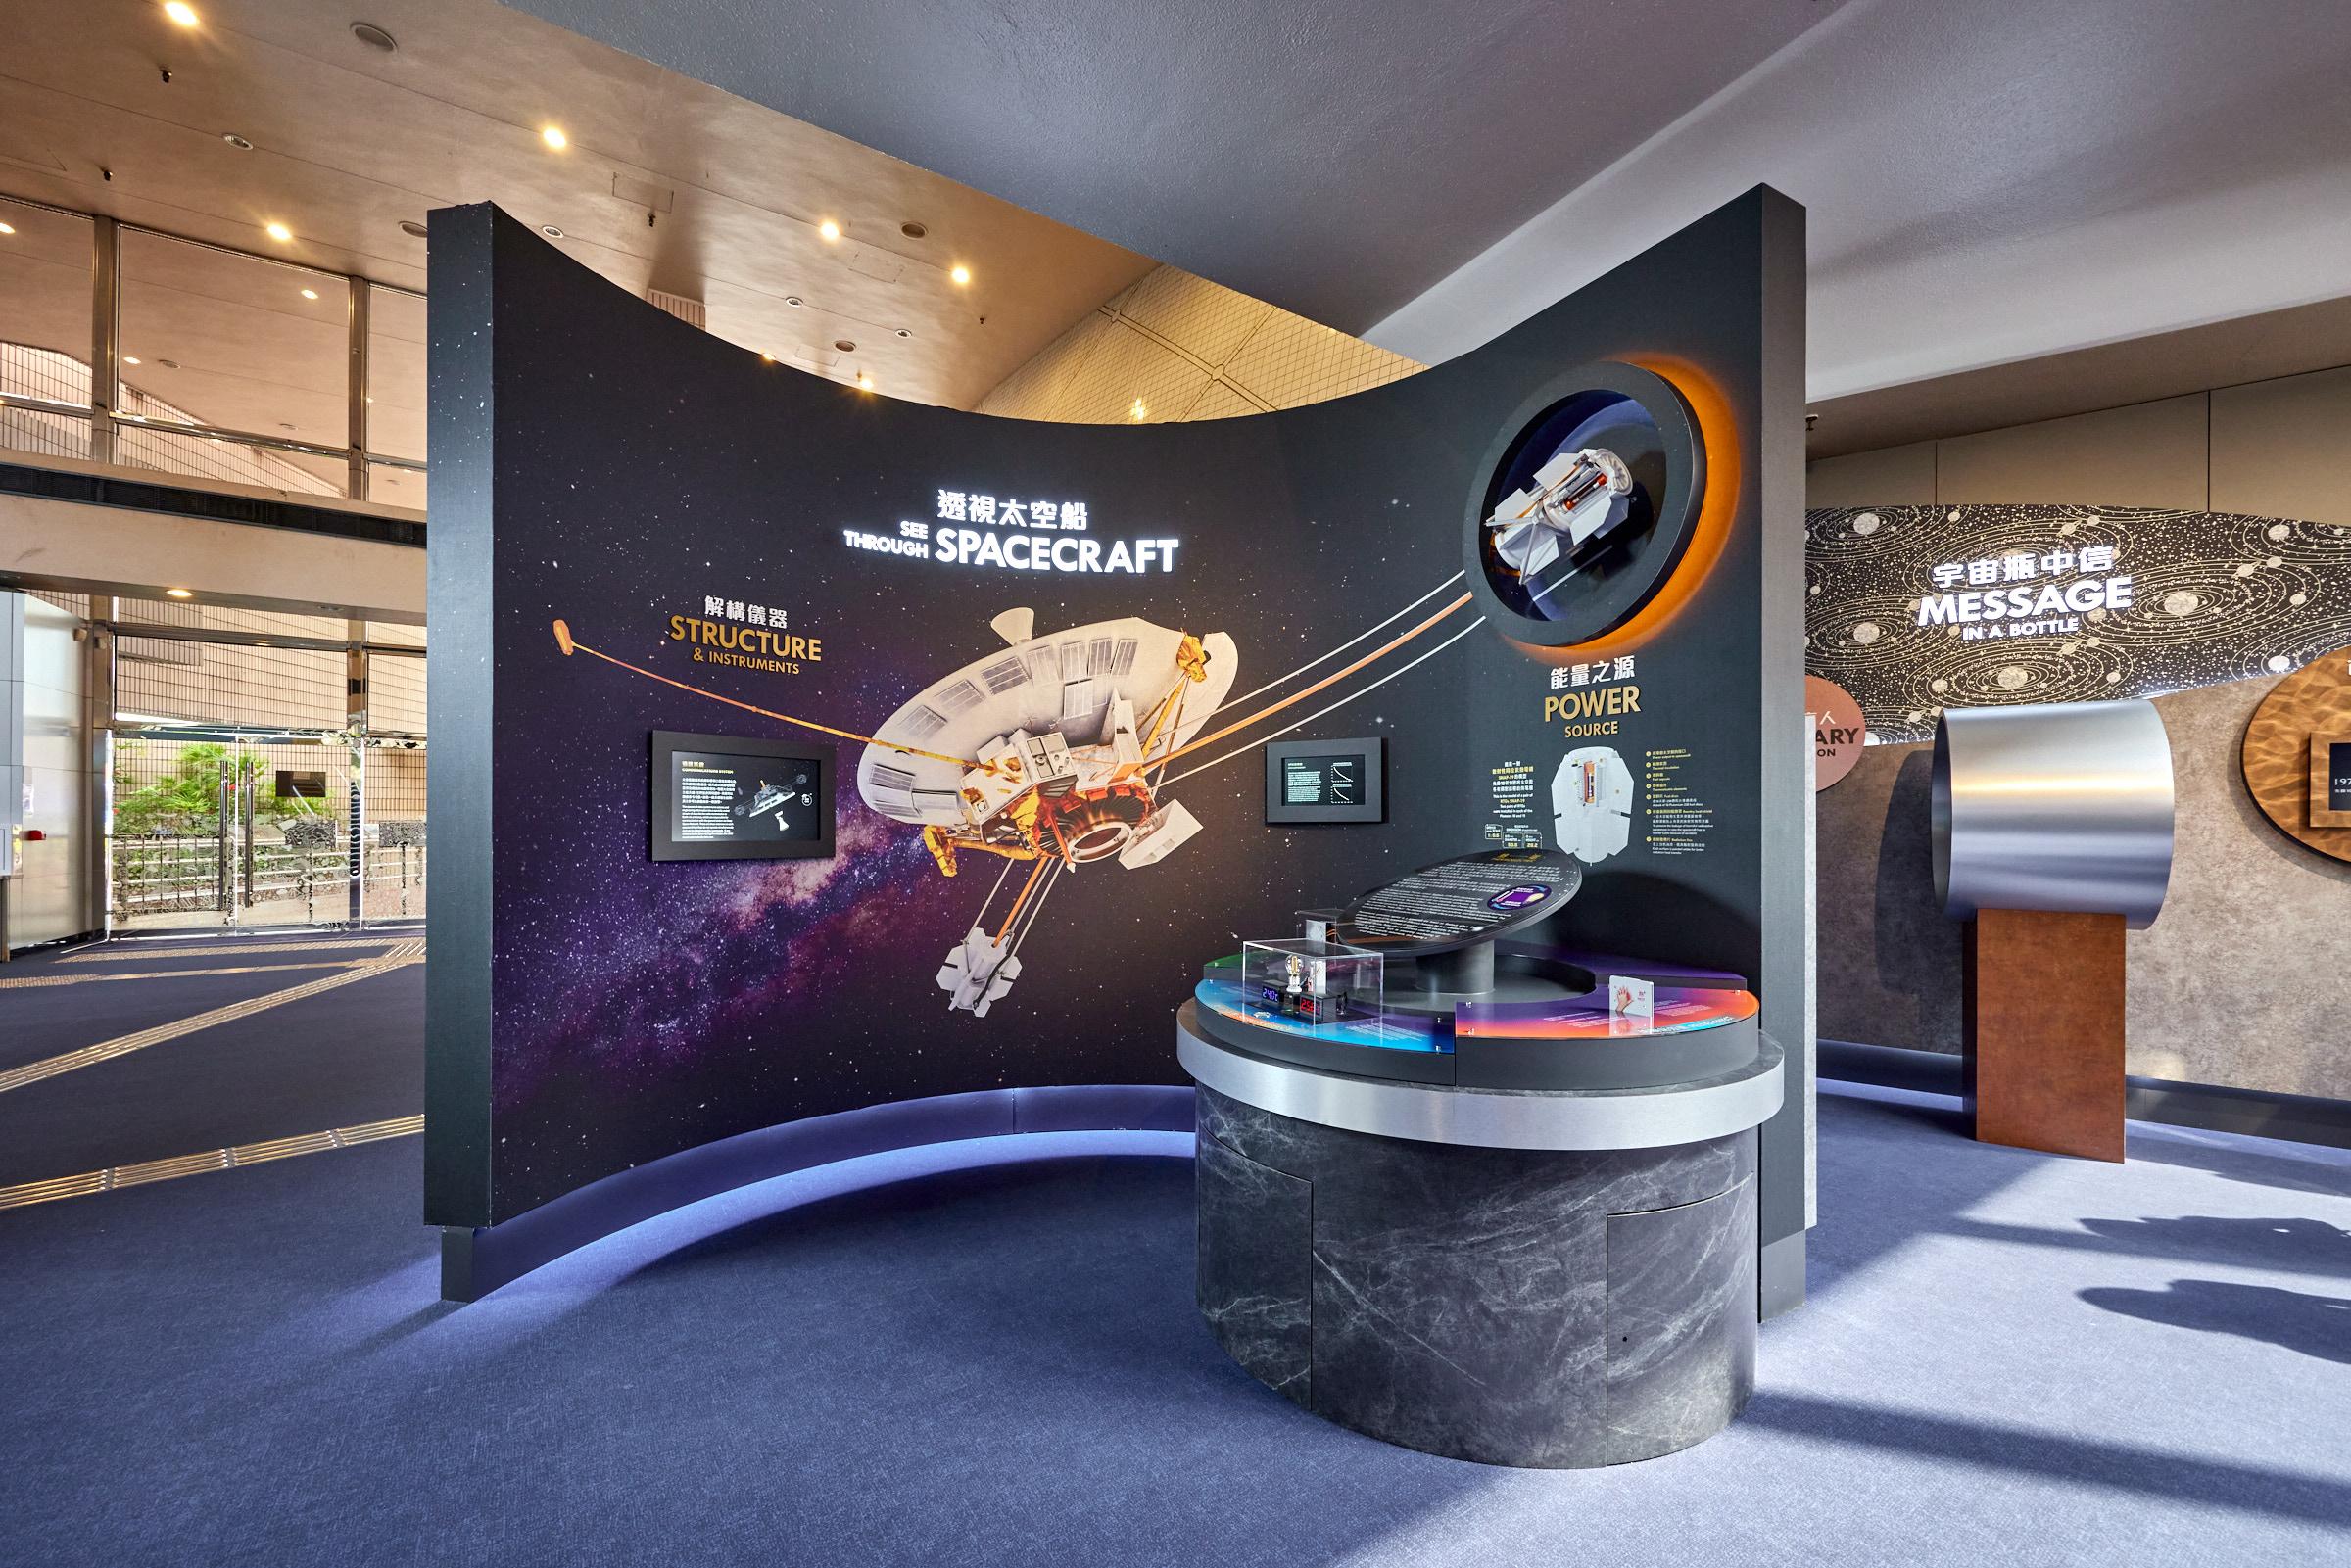 The Hong Kong Space Museum will launch a new thematic exhibition, "The Pioneer Interstellar Mission and Beyond", tomorrow (October 26). Picture shows the exhibition panels that introduce the structure and power source of Pioneer 10 and 11, the twin spacecraft which were launched in the 1970s.